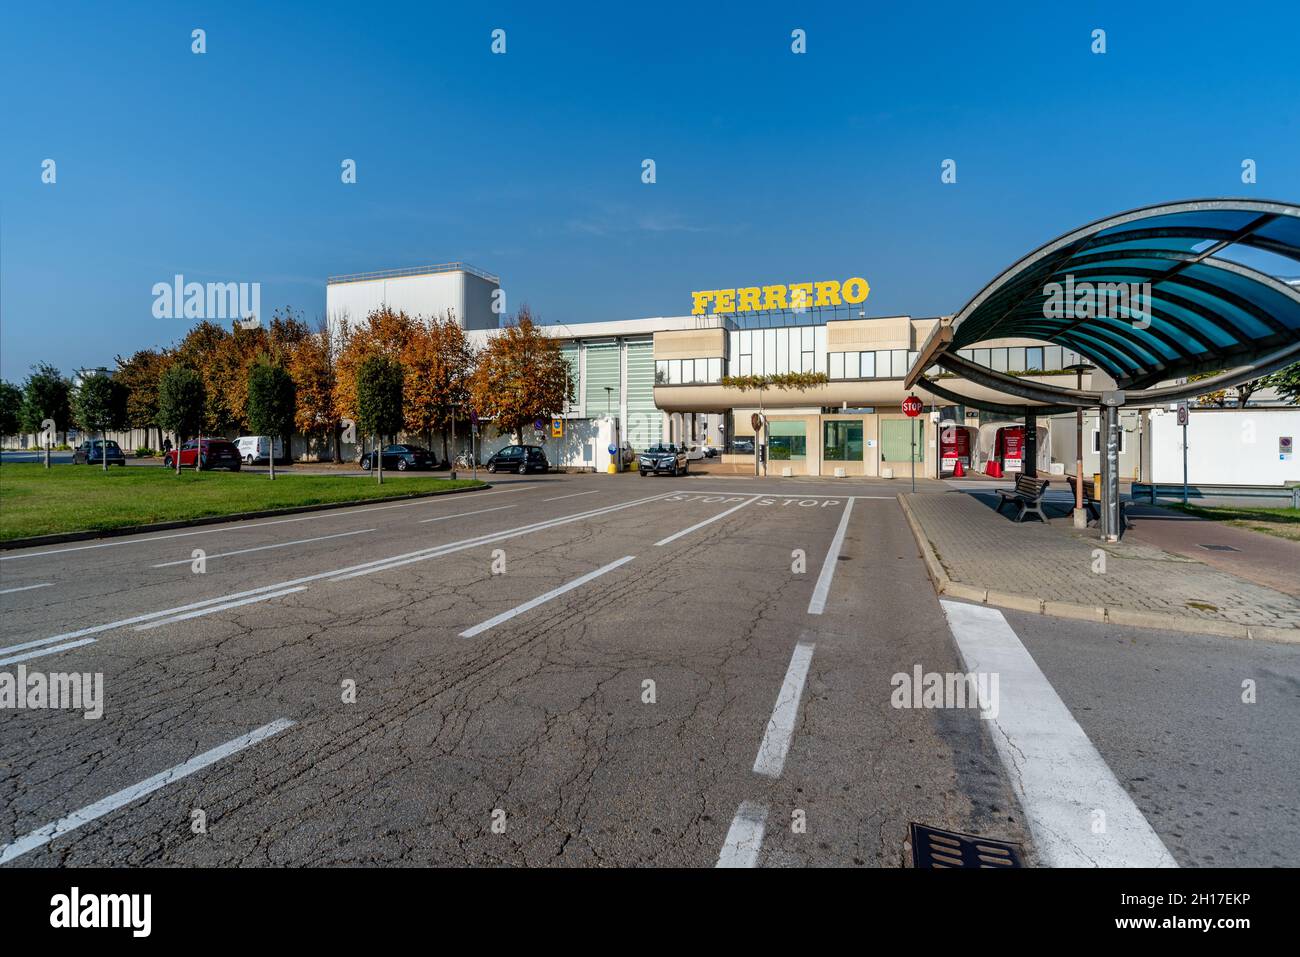 Alba, Cuneo, Italy - October 12, 2021: Ferrero factory building, famous and large confectionery factory producing Nutella, in via Vivaro Stock Photo